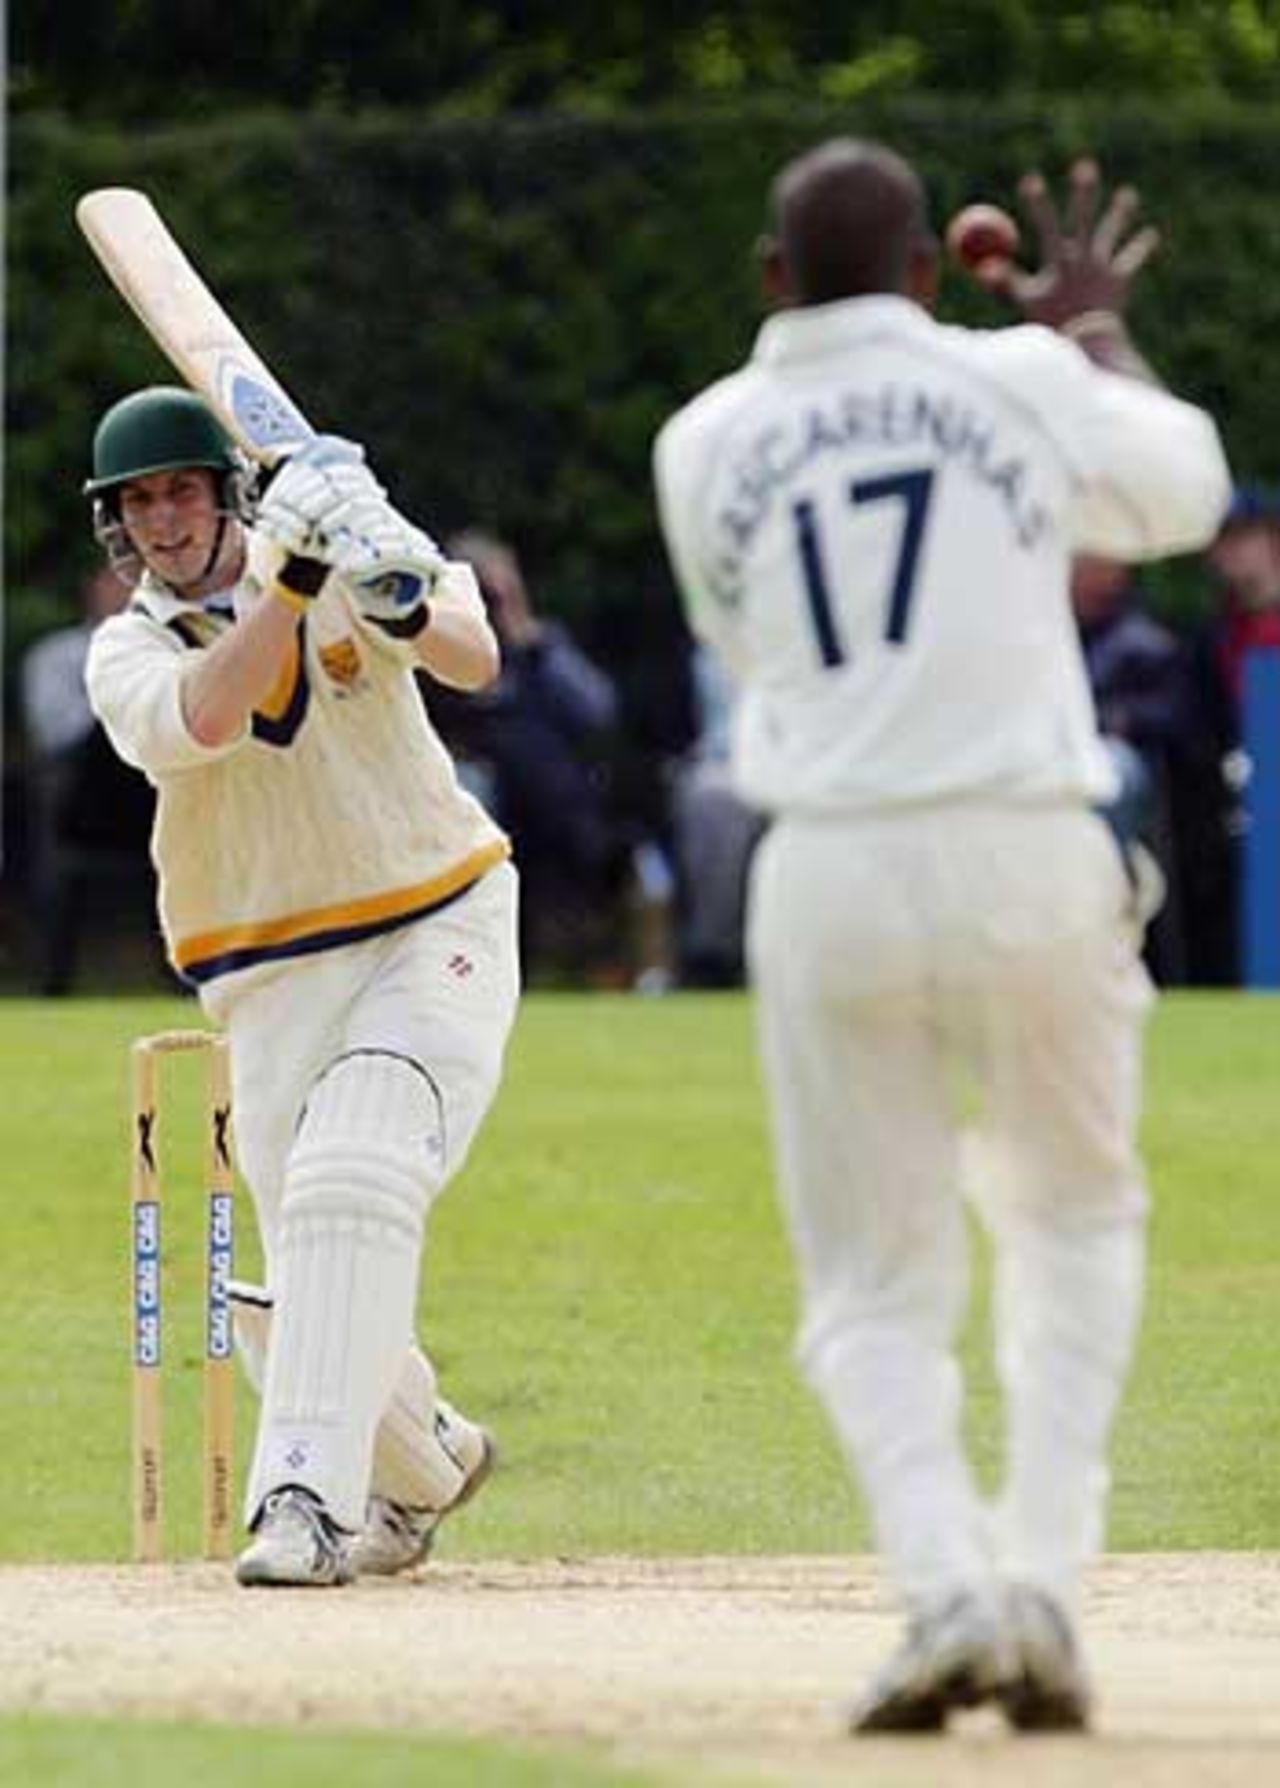 Duncan Catterall is caught and bowled by Dimitri Mascarenhas, Shropshire v Hampshire, Whitchurch, May 4